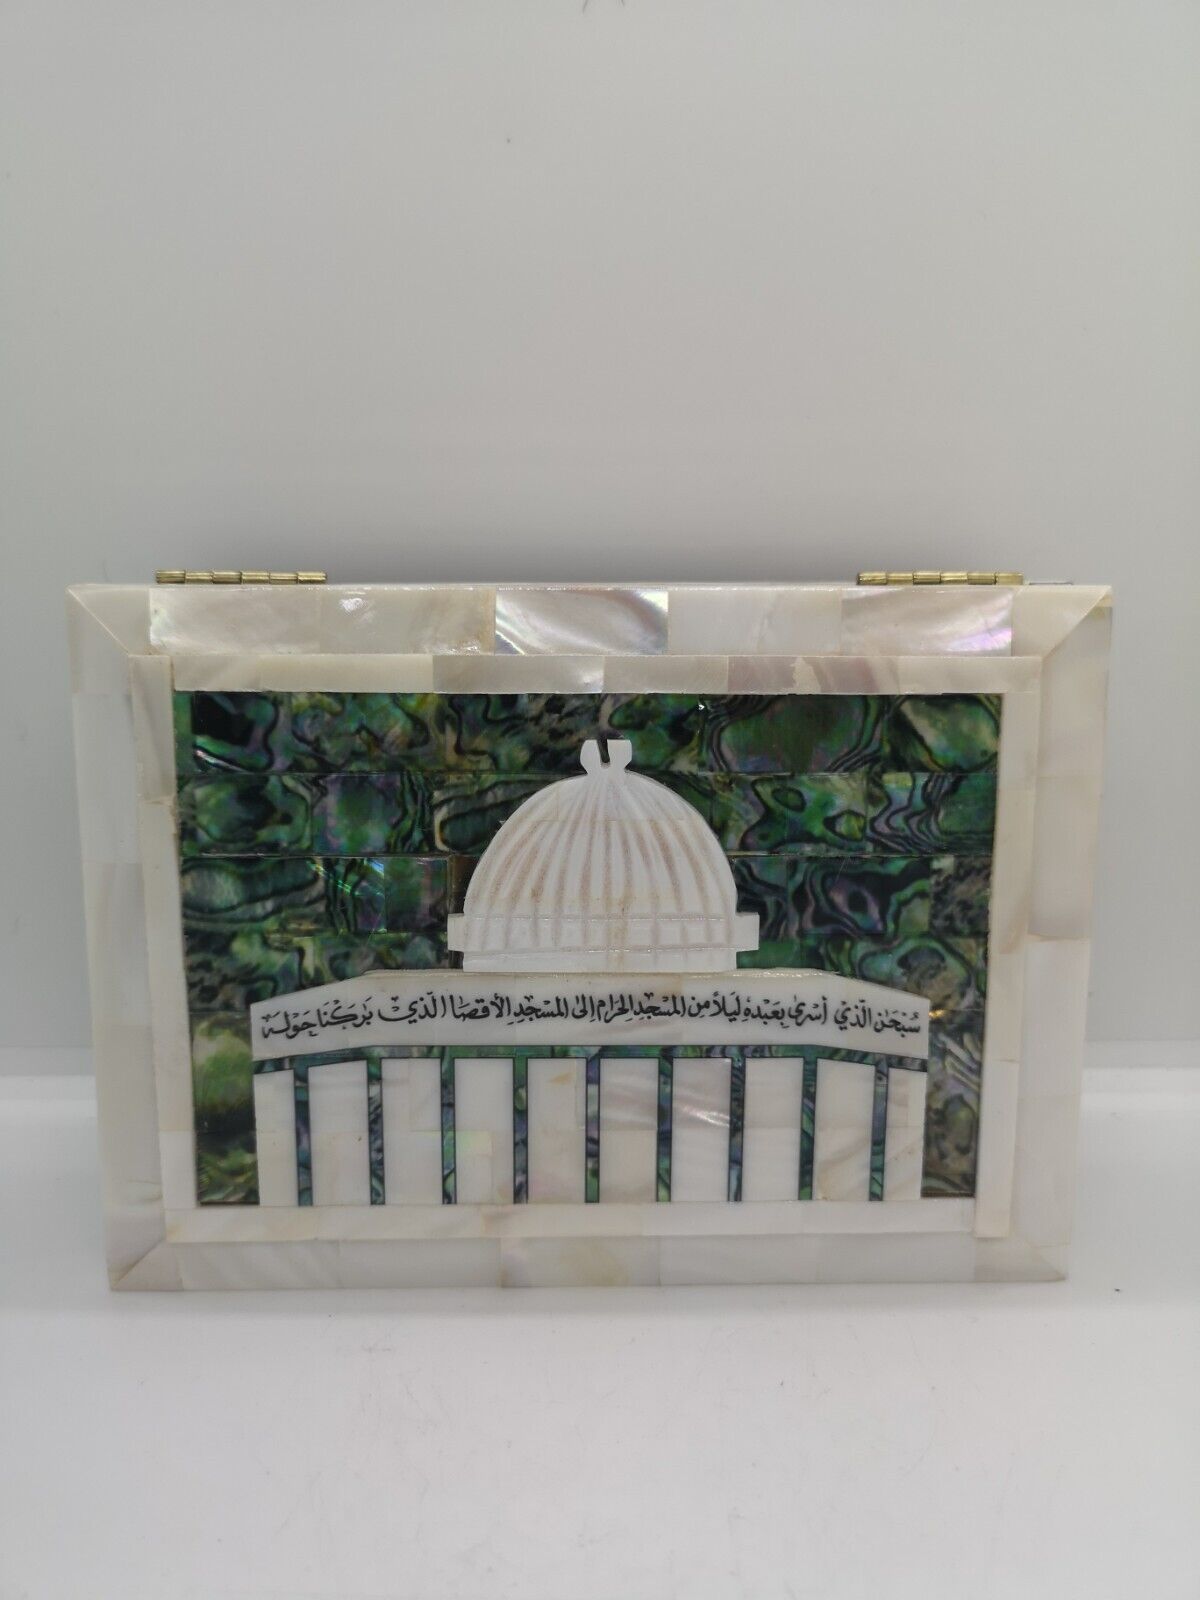 Mother Of Pearl Sea Shell Mosque Aqsa Palestine With Holy Quran Handmade Crafted